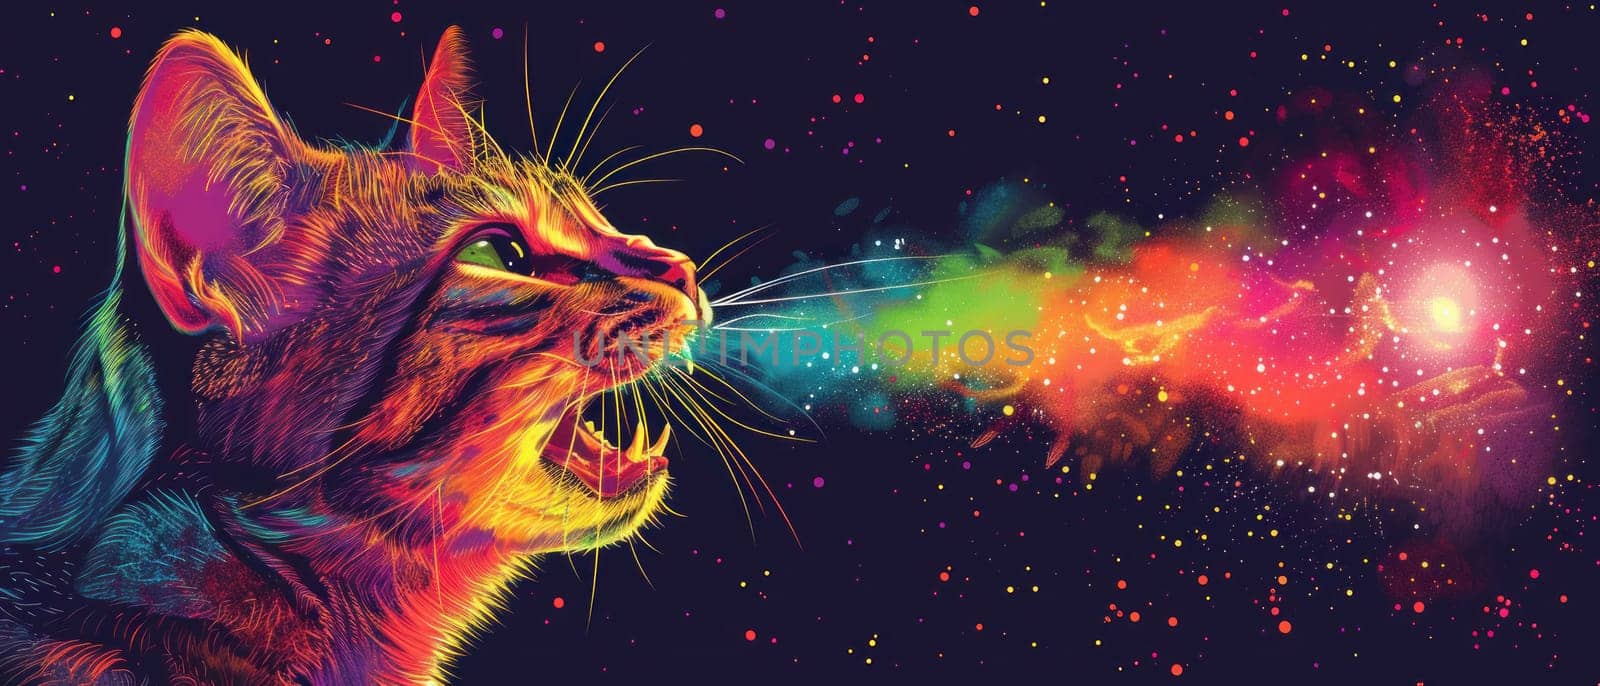 A cat is blowing a rainbow of colors out of its mouth. The image is a colorful and whimsical representation of a cat's playful and imaginative nature